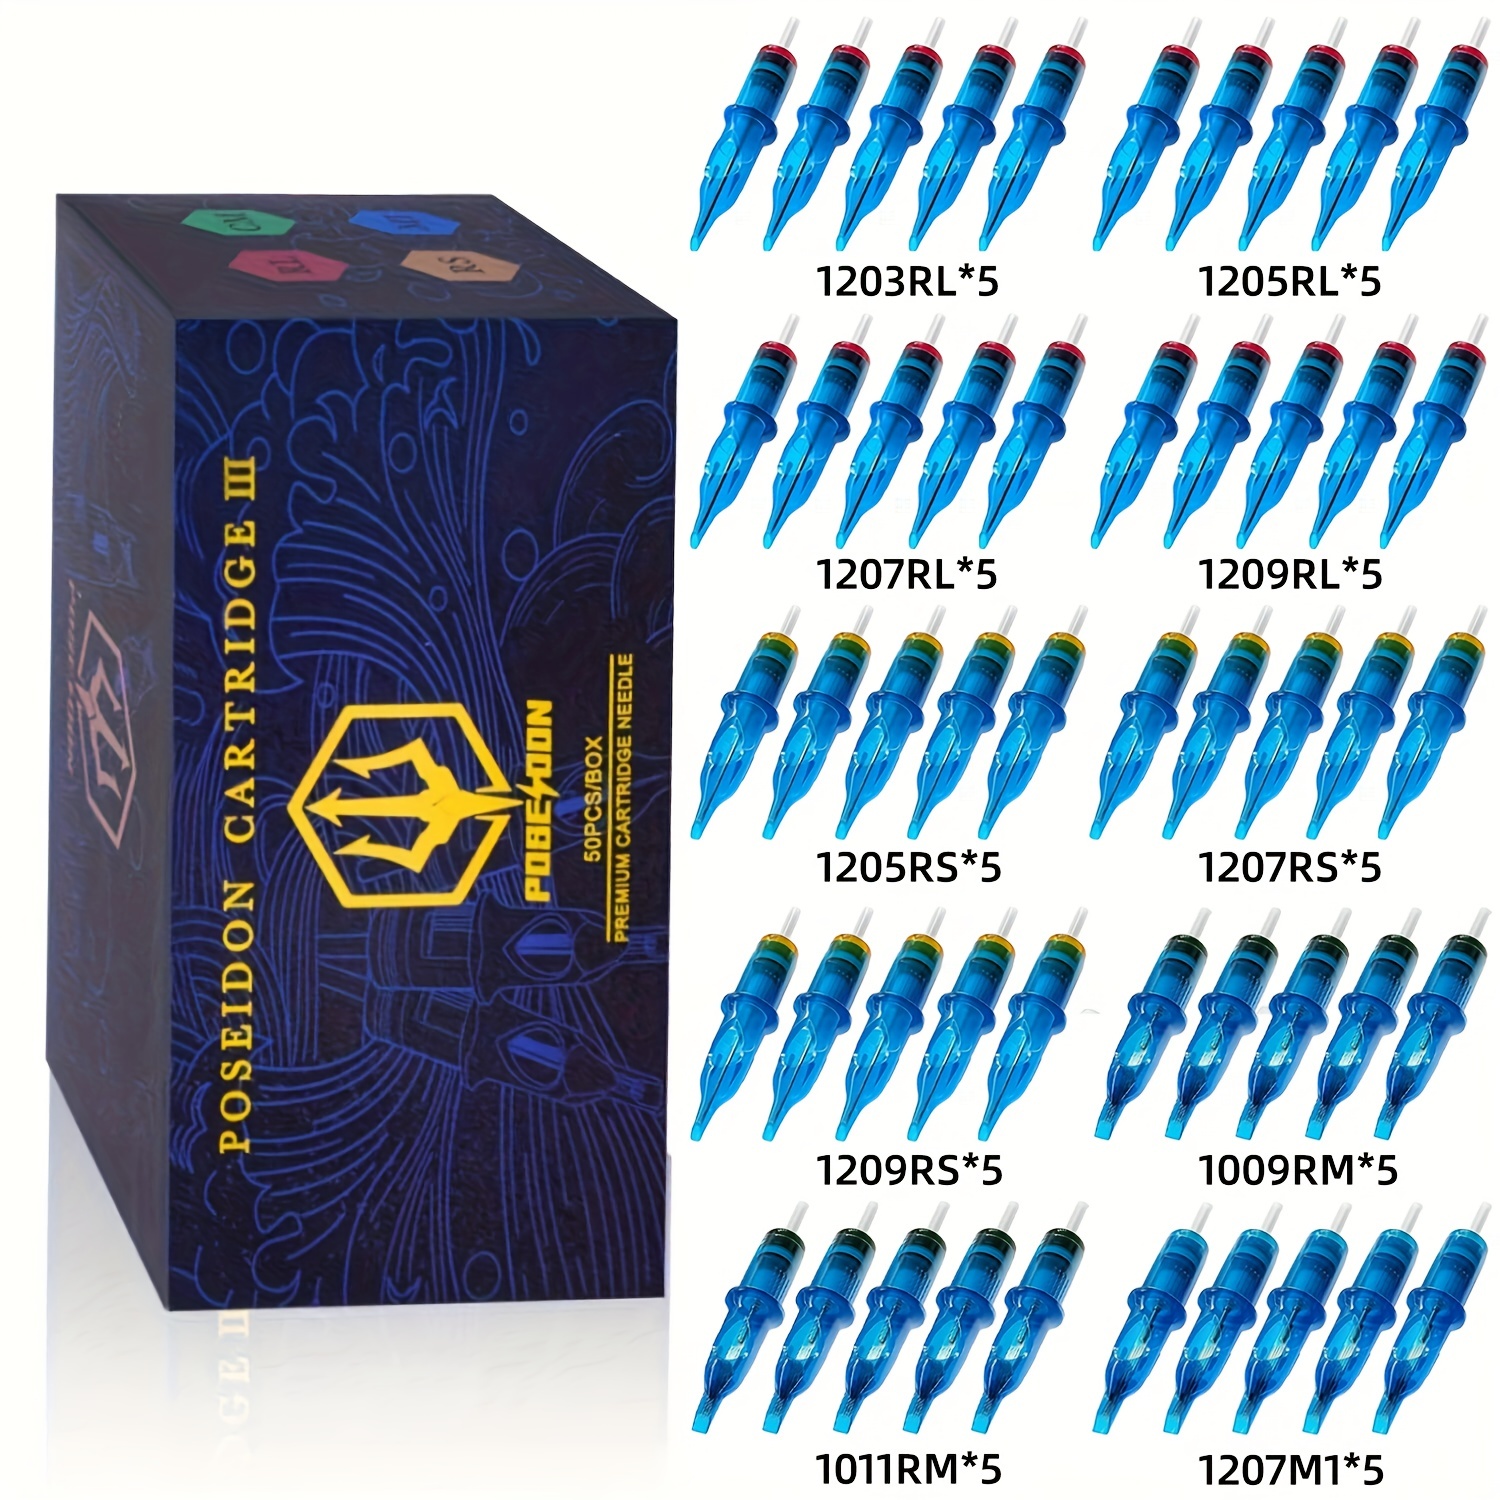  POPU Tattoo Cartridge Needles, 20pcs 0.35mm 1RL Disposable  Tattoo Needle Cartridges Standard 1 Round Liner for Rotary Tattoo Pen  Machine Supply (1201RL) : Beauty & Personal Care